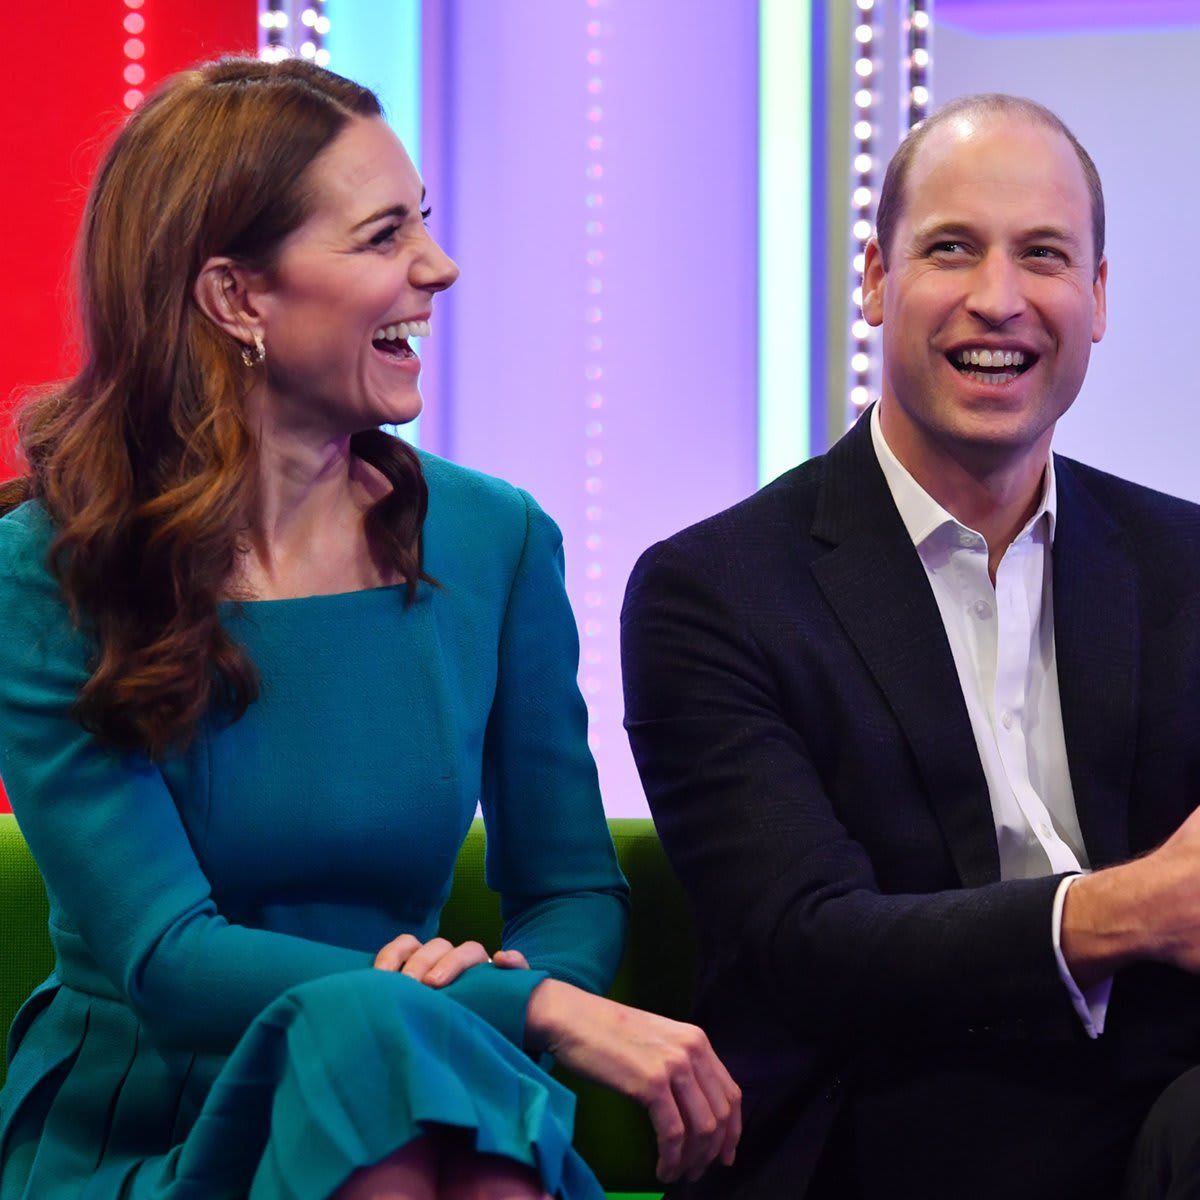 The Duchess of Cambridge teases her husband about his hair